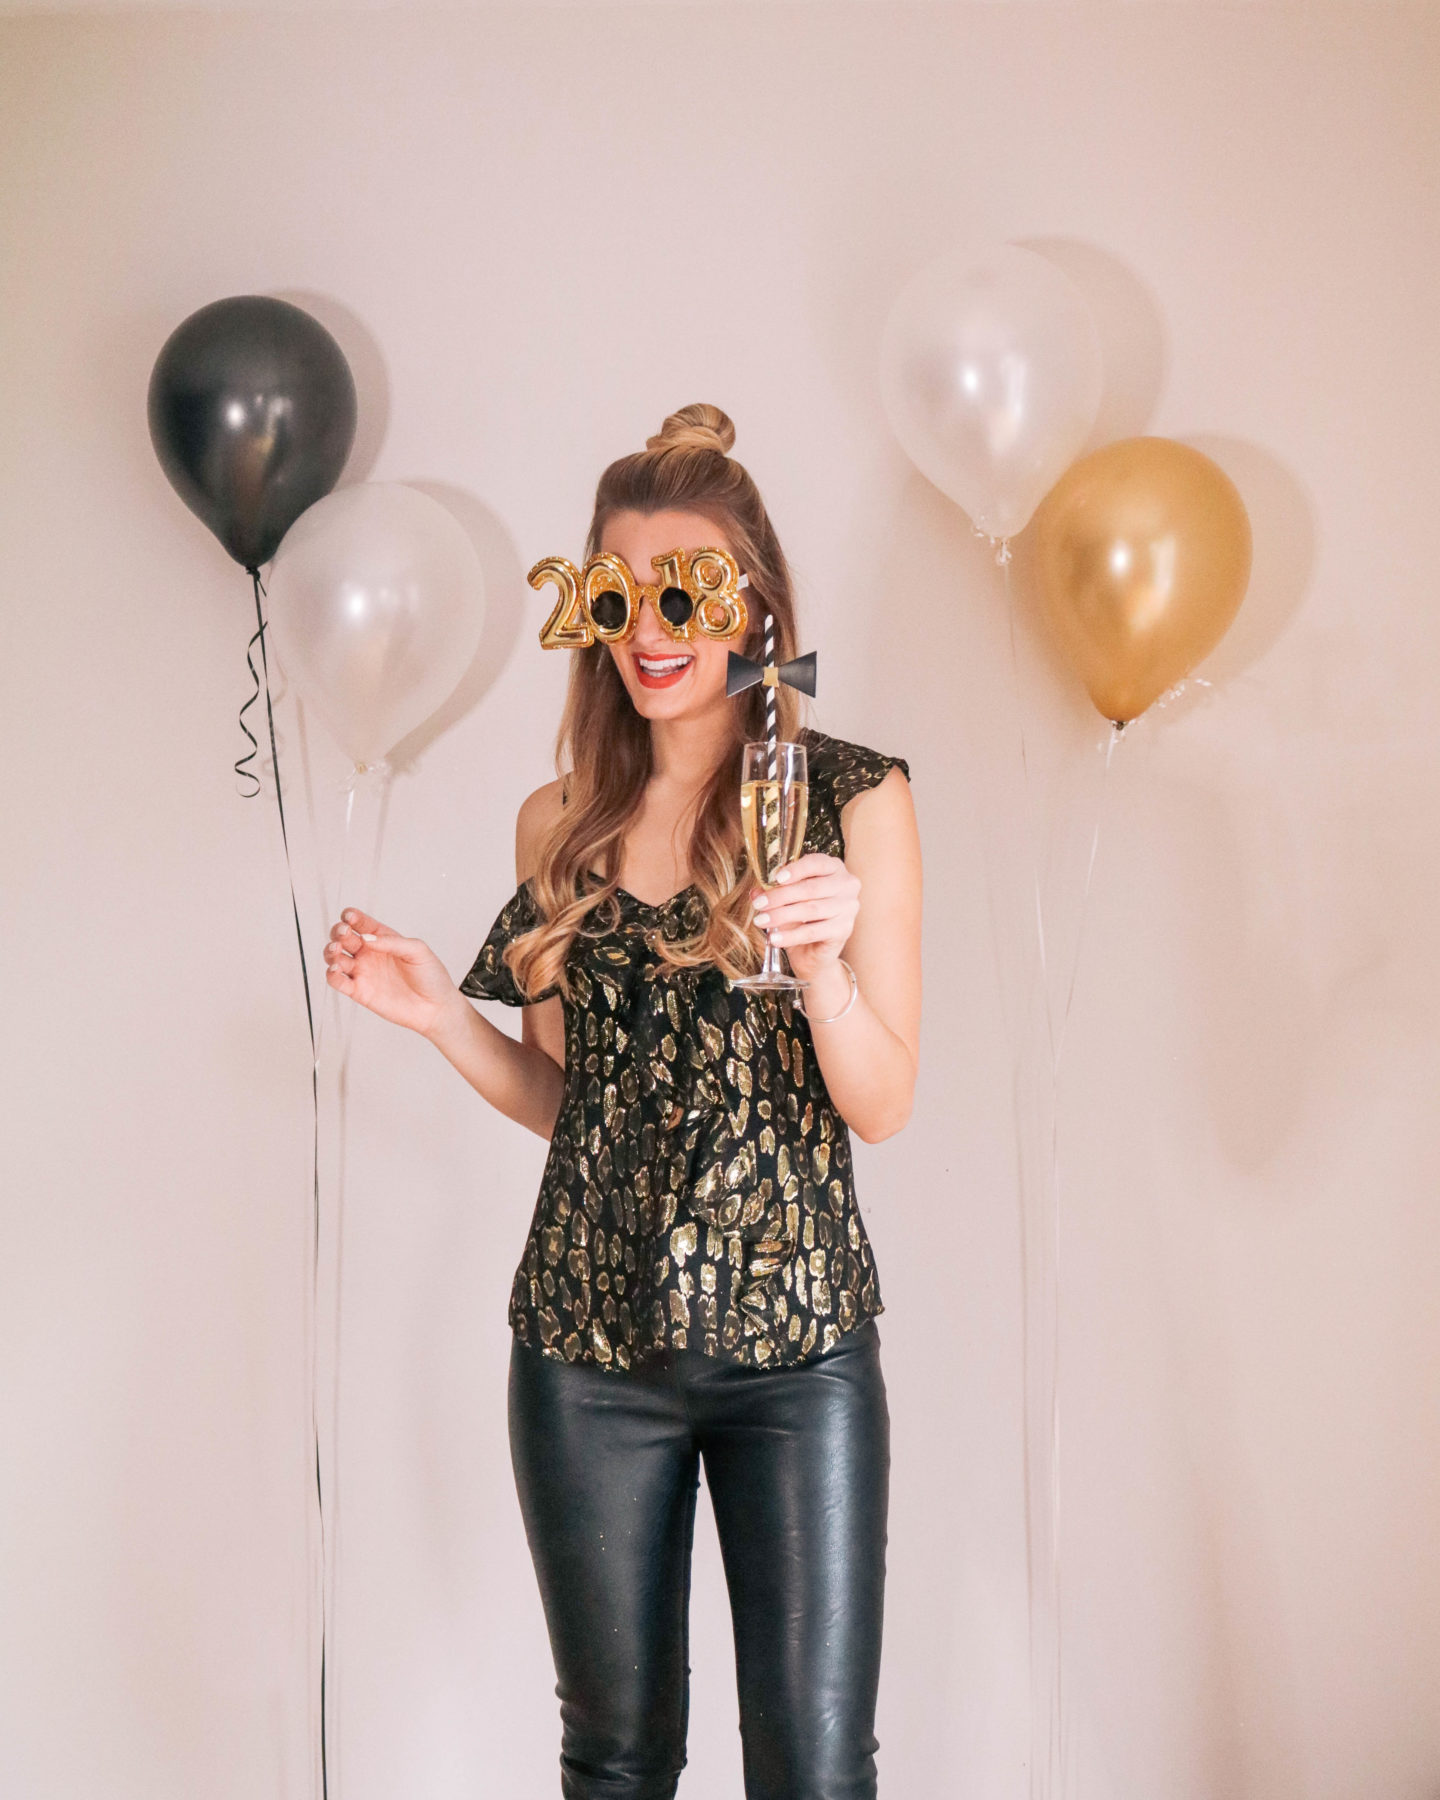 Fashion blogger, Leigha Gardner, of The Lilac Press sharing some designer looks for NYE including this metallic Veronica Beard top and Stella McCartney faux leather leggings.